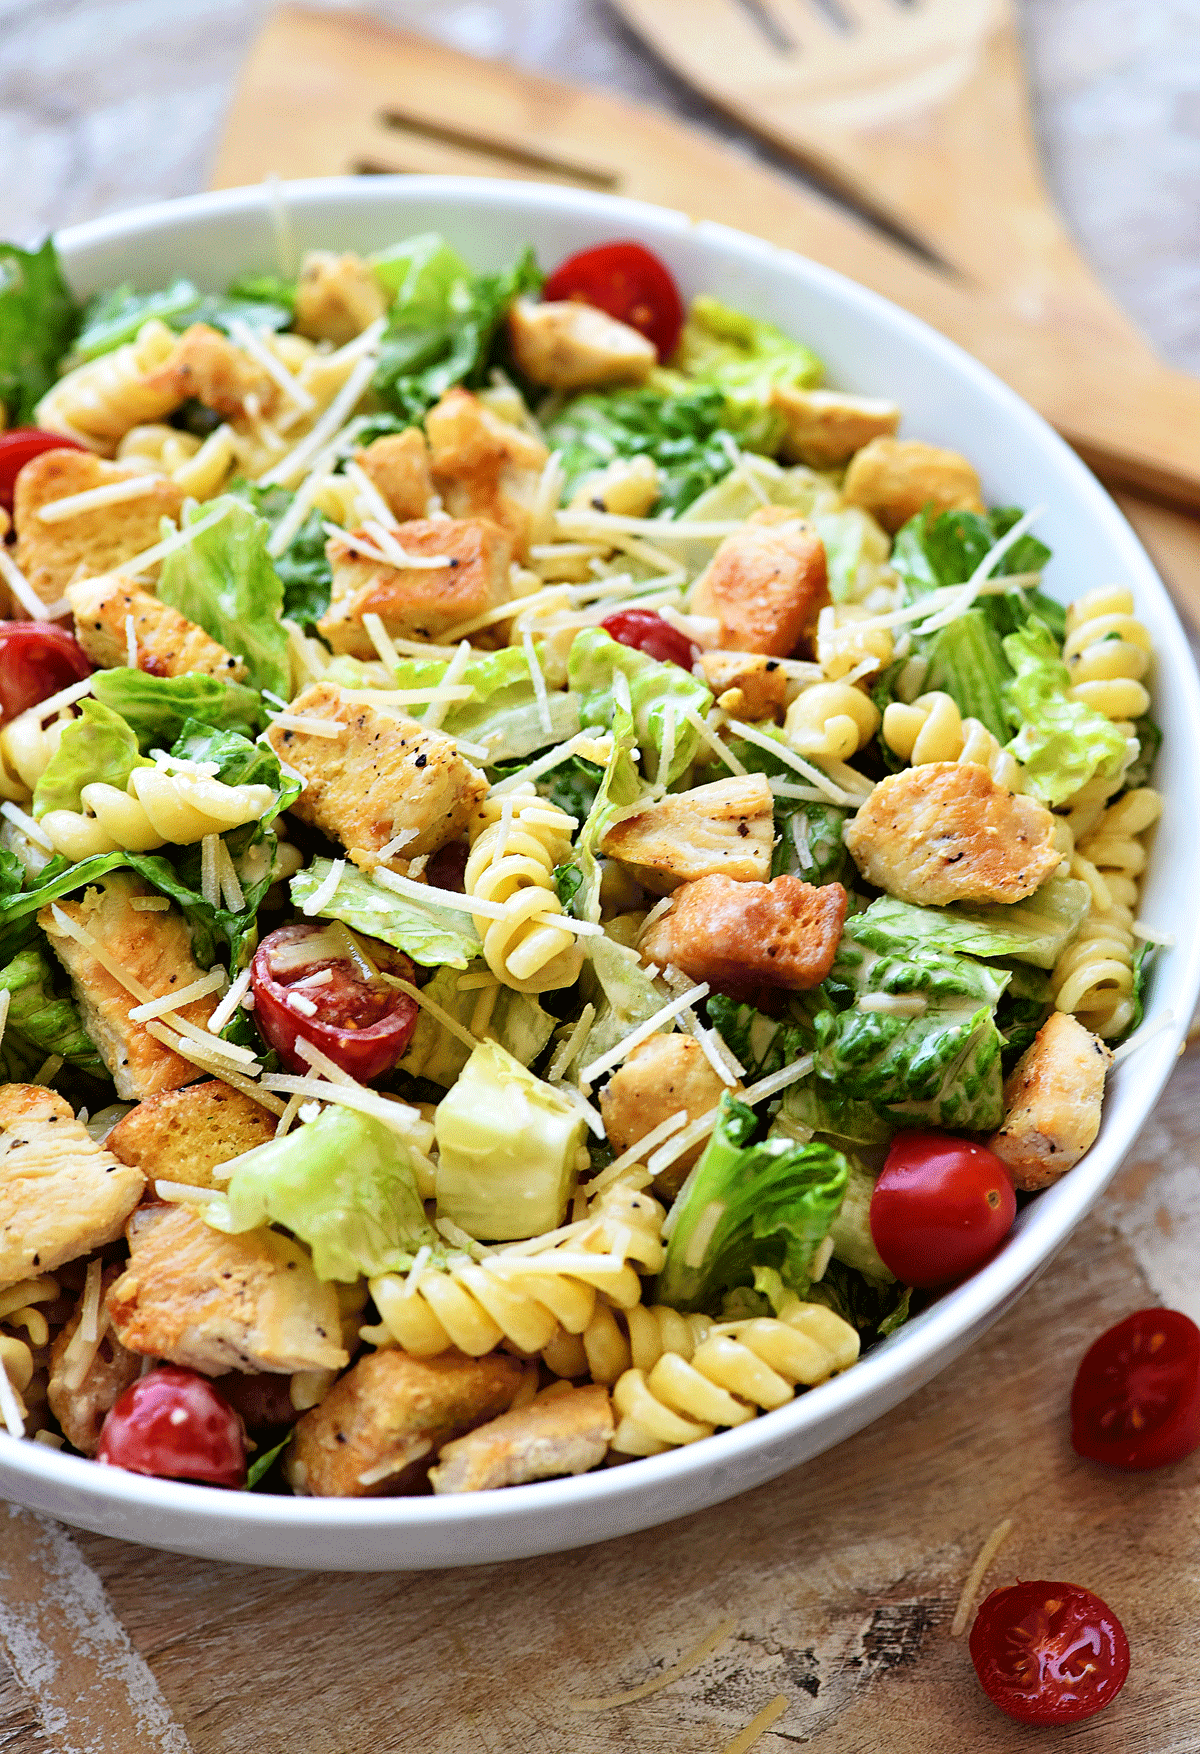 37 Salad Recipes That Will Help You Smash Your Weight Loss Goals Trimmedandtoned